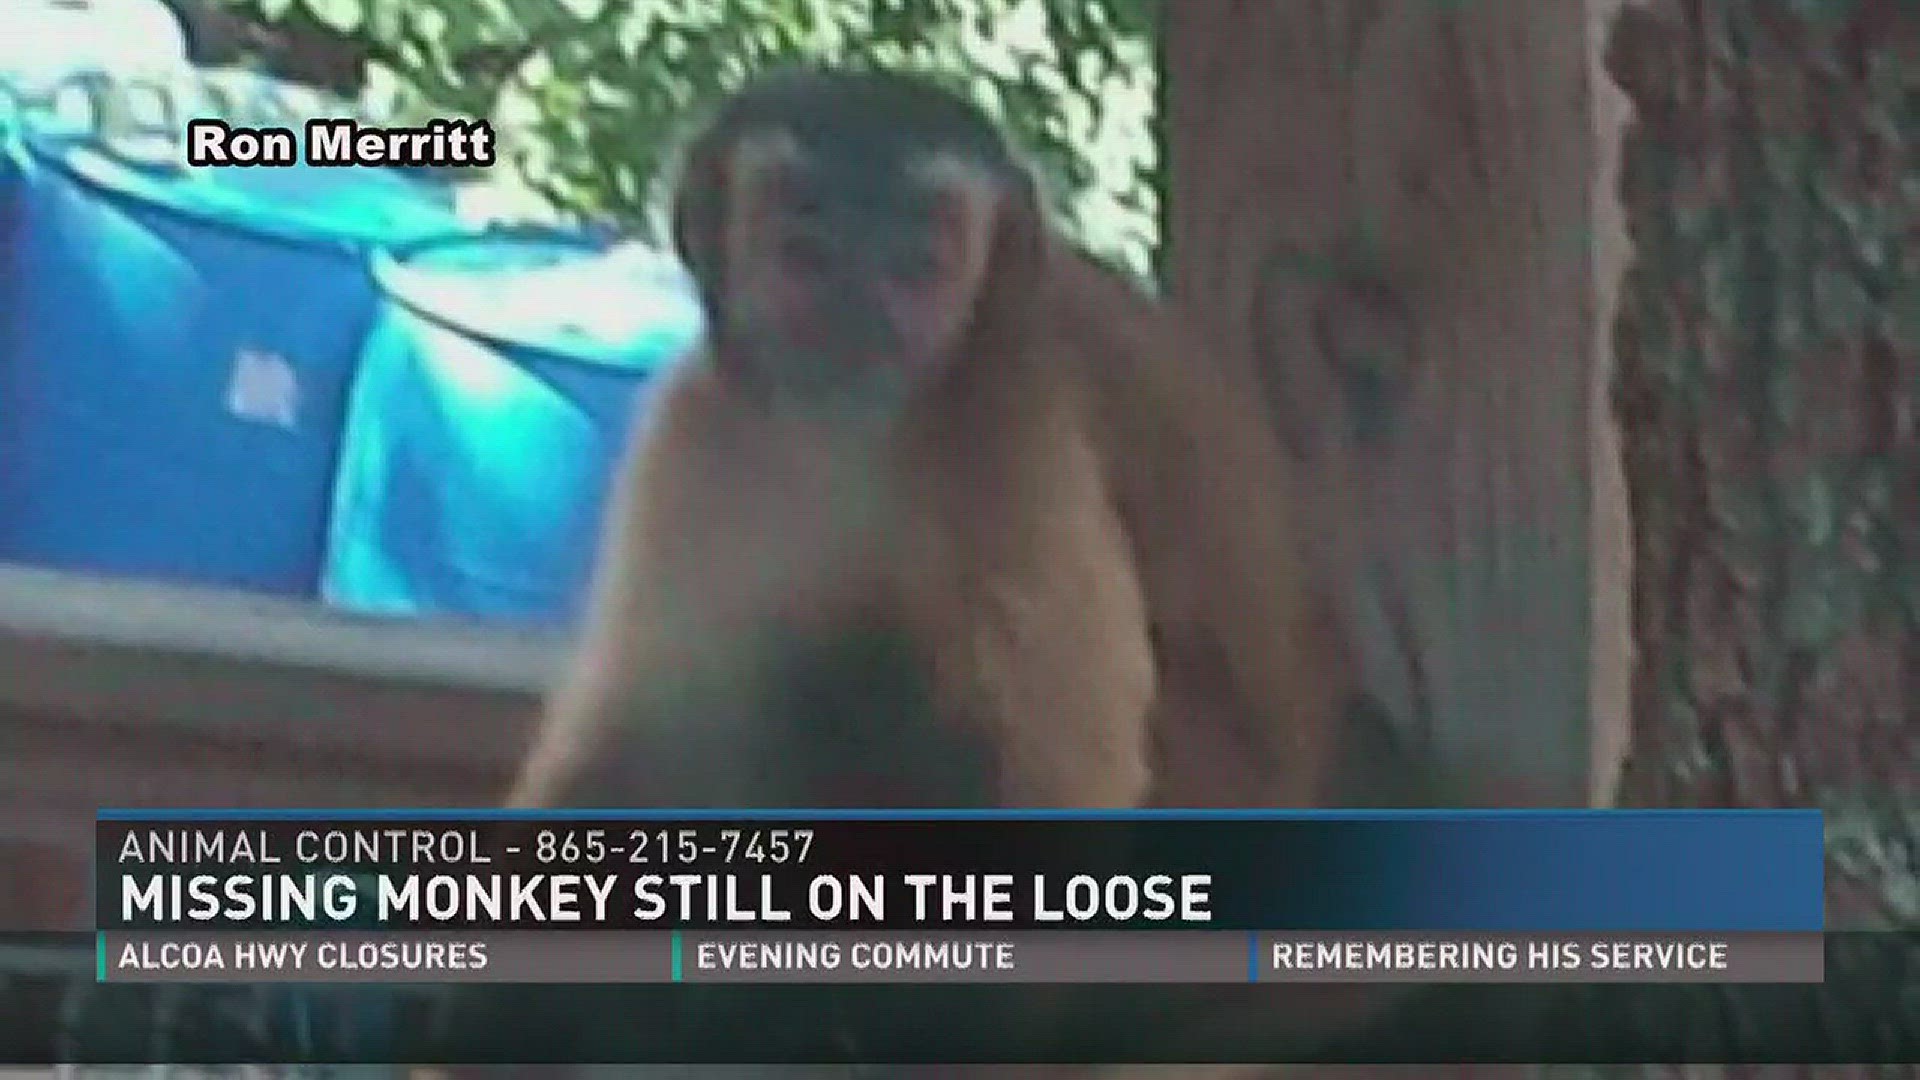 Aug. 24, 2017: A monkey is still on the loose in North Knoxville.